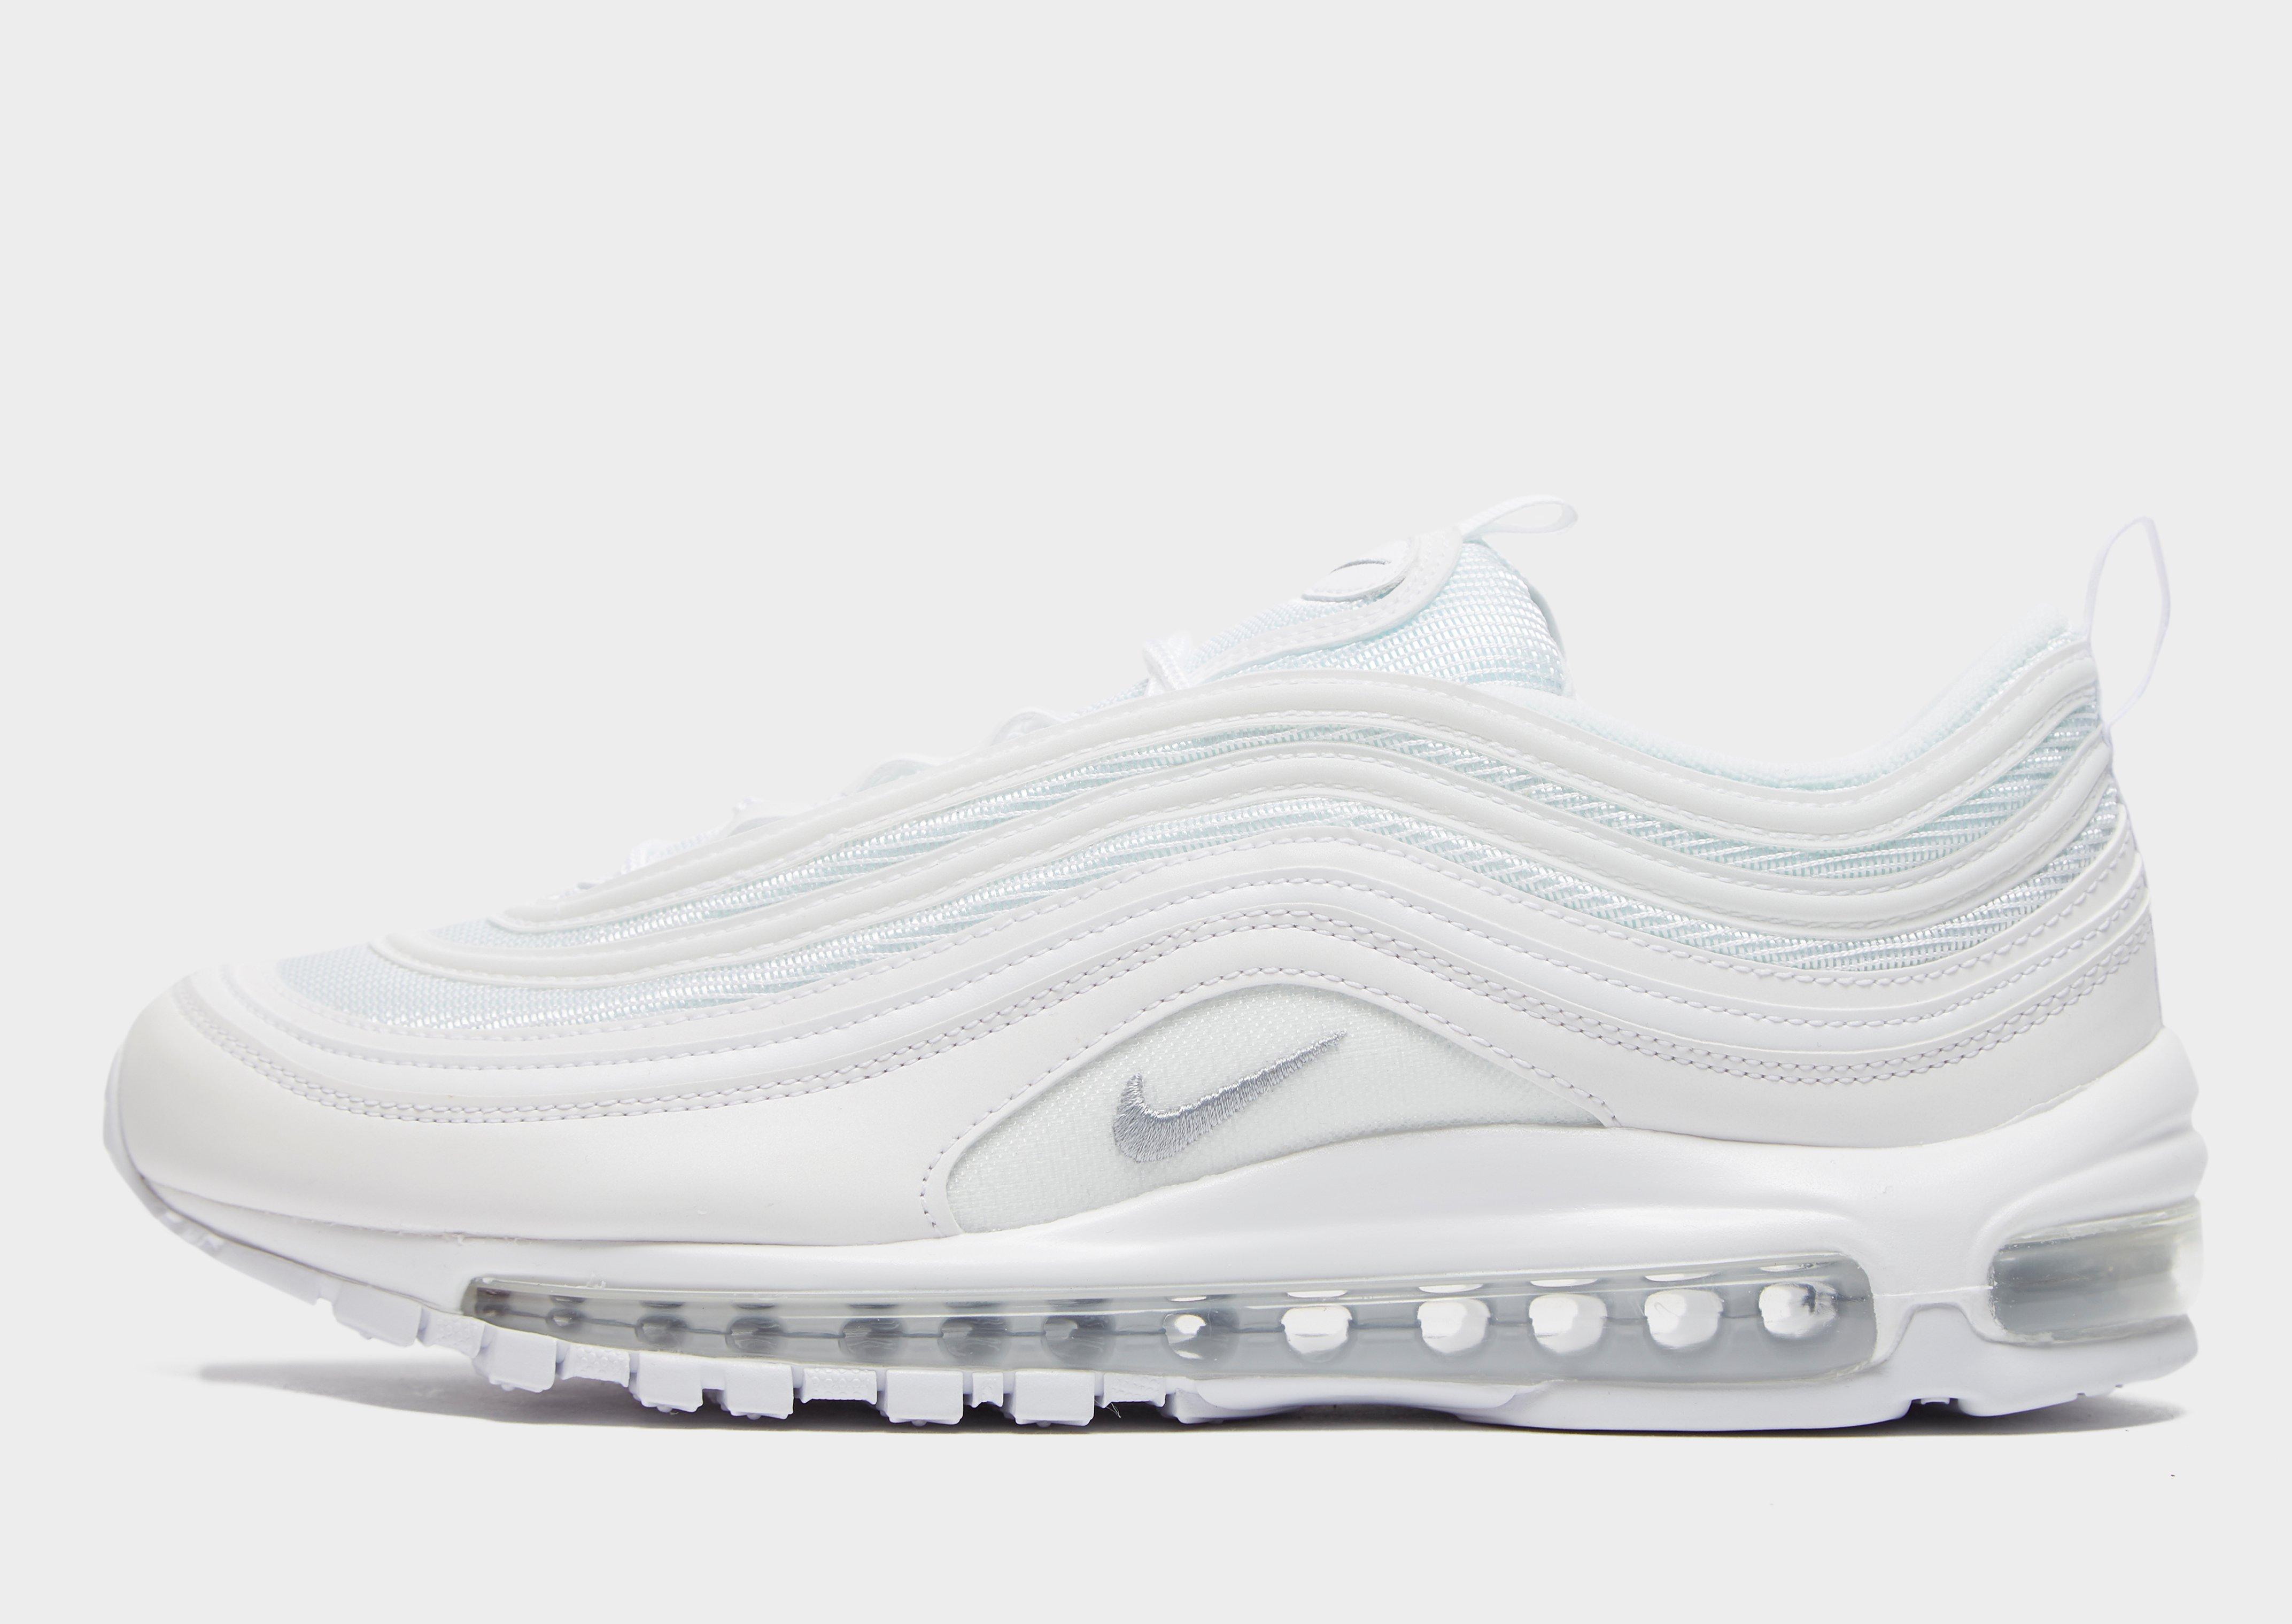 Nike Remixes Its Air Max 97 With A Modern VaporMax Sole